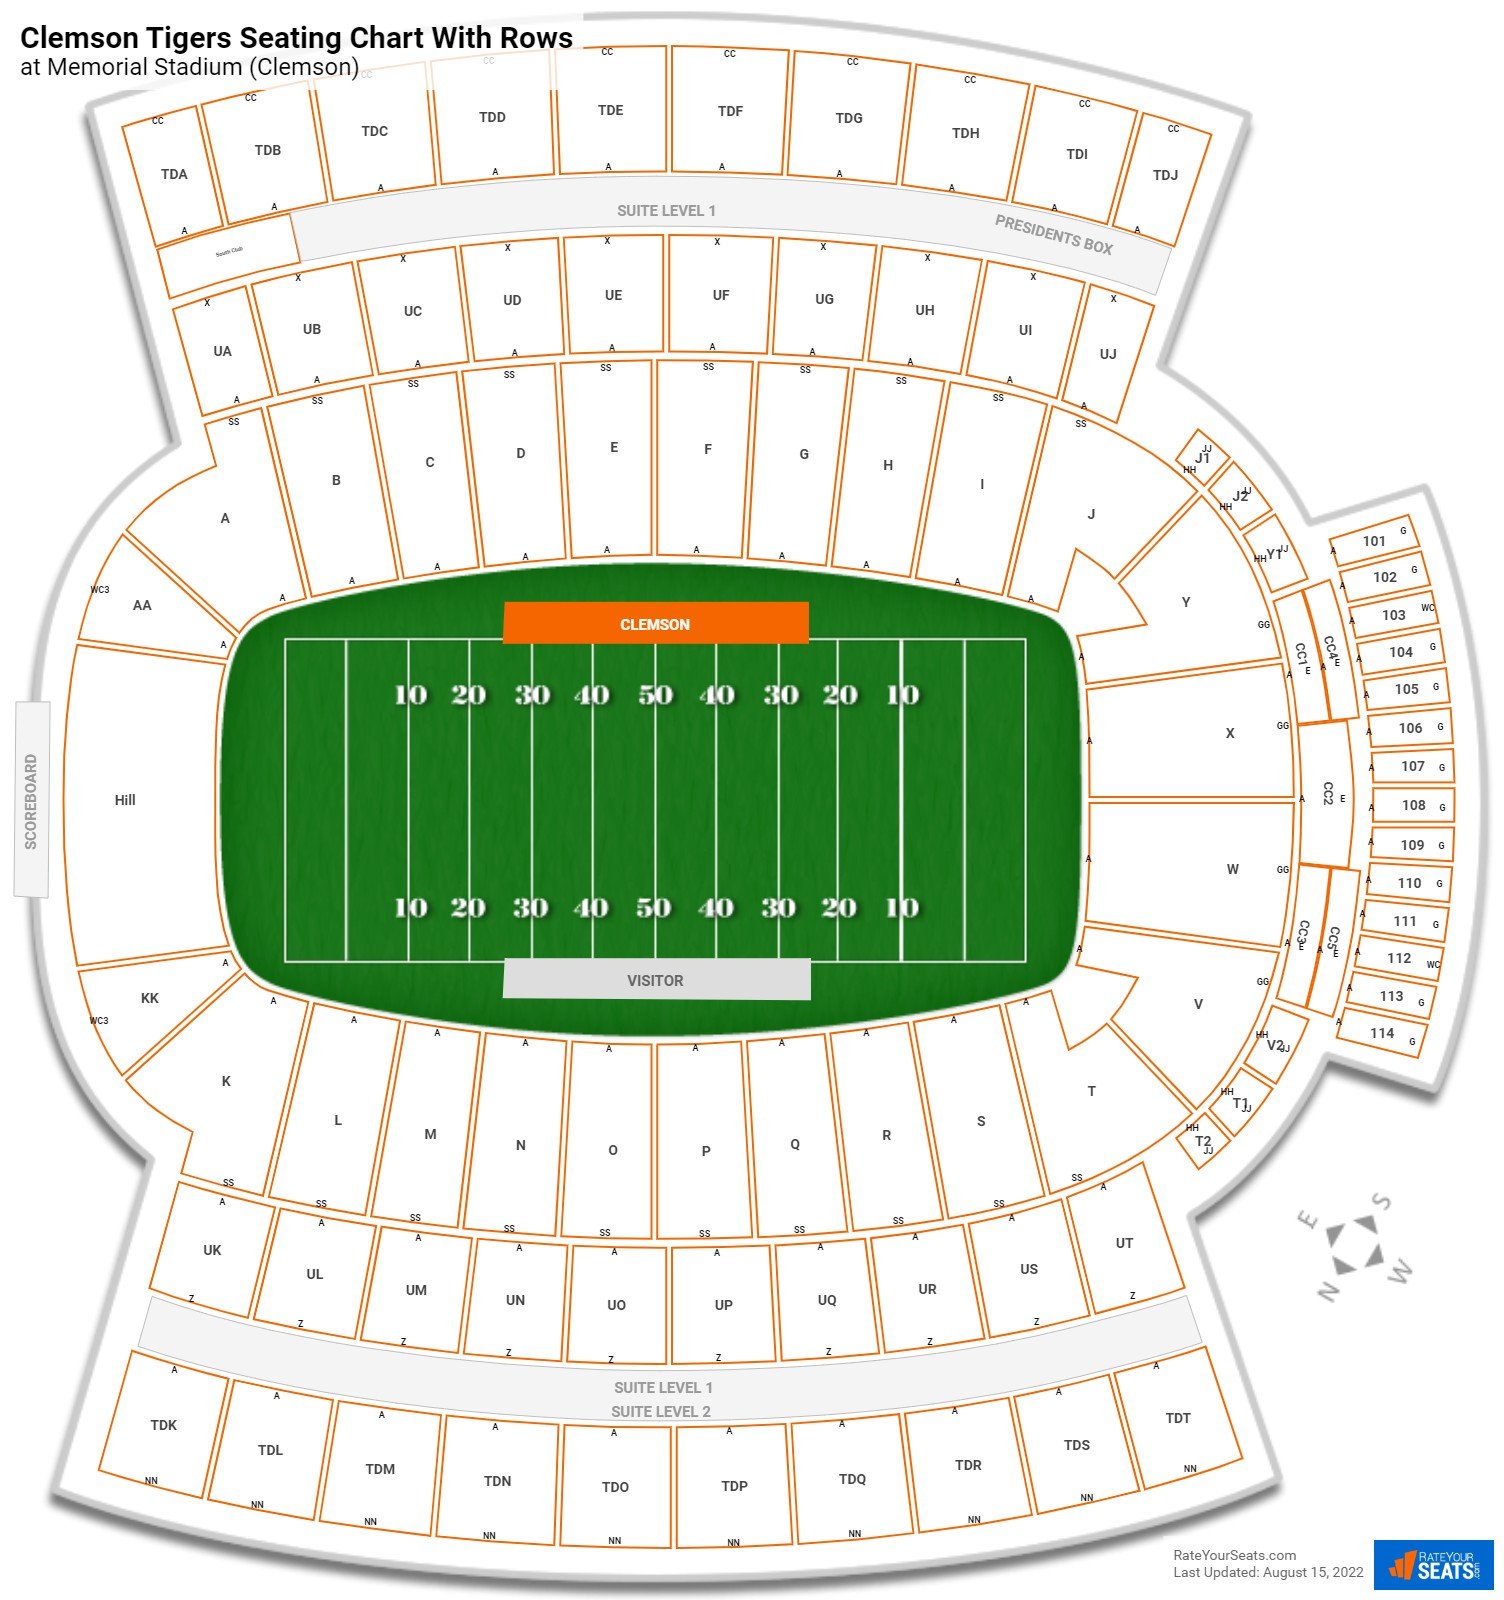 Memorial Stadium (Clemson) seating chart with row numbers